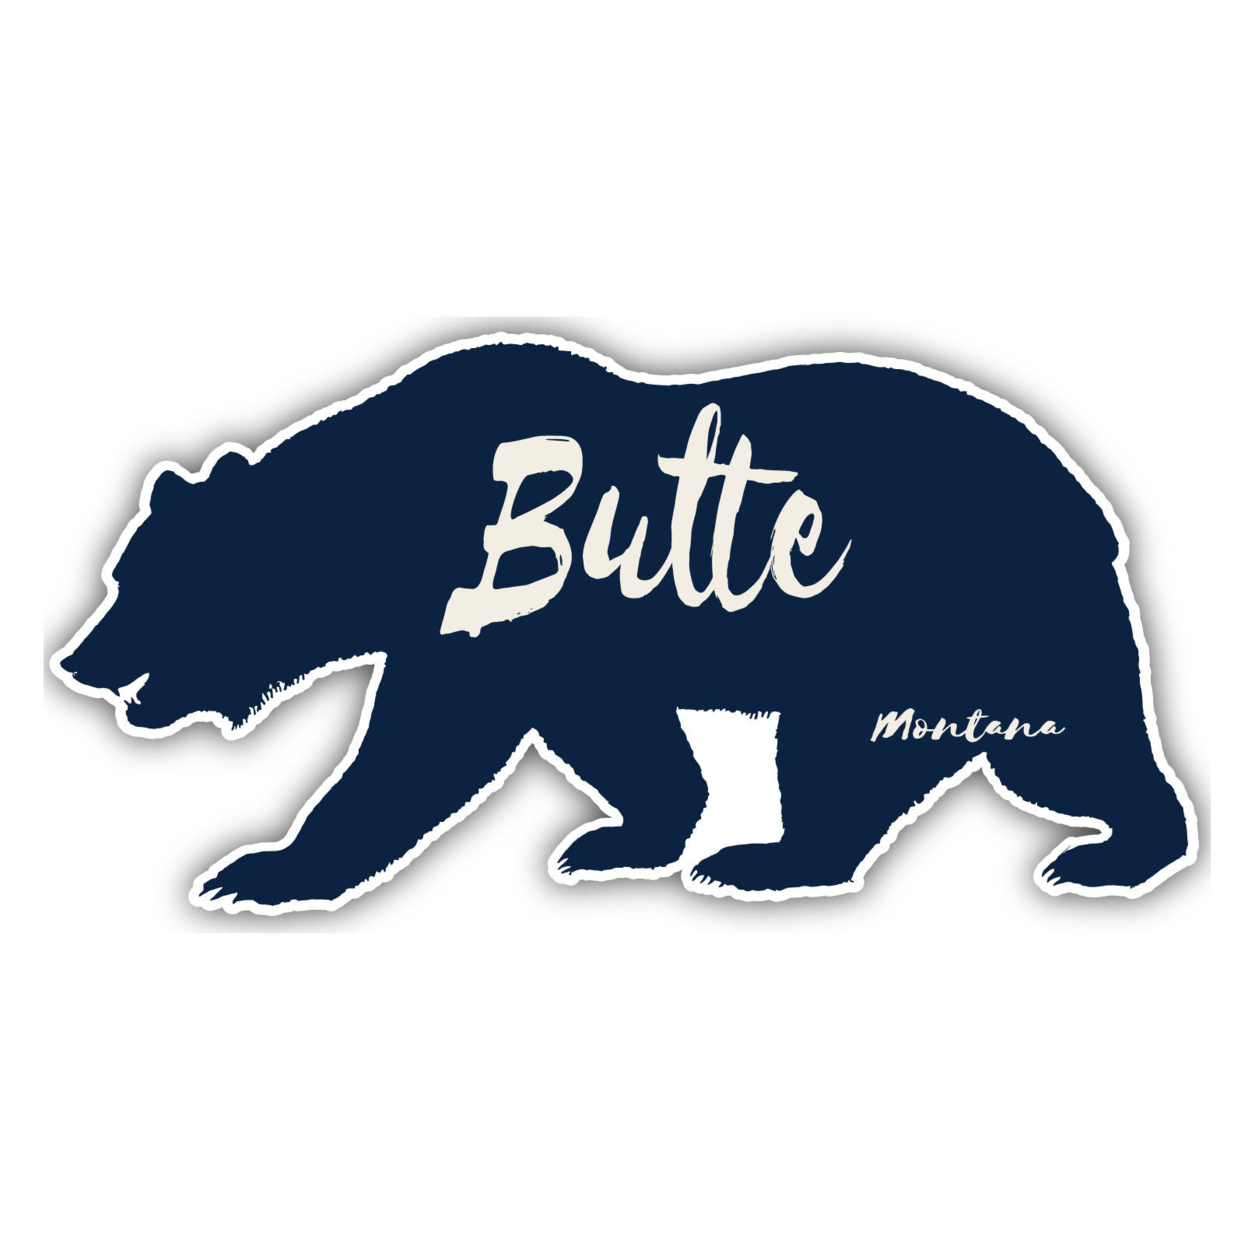 Butte Montana Souvenir Decorative Stickers (Choose Theme And Size) - 4-Pack, 6-Inch, Bear